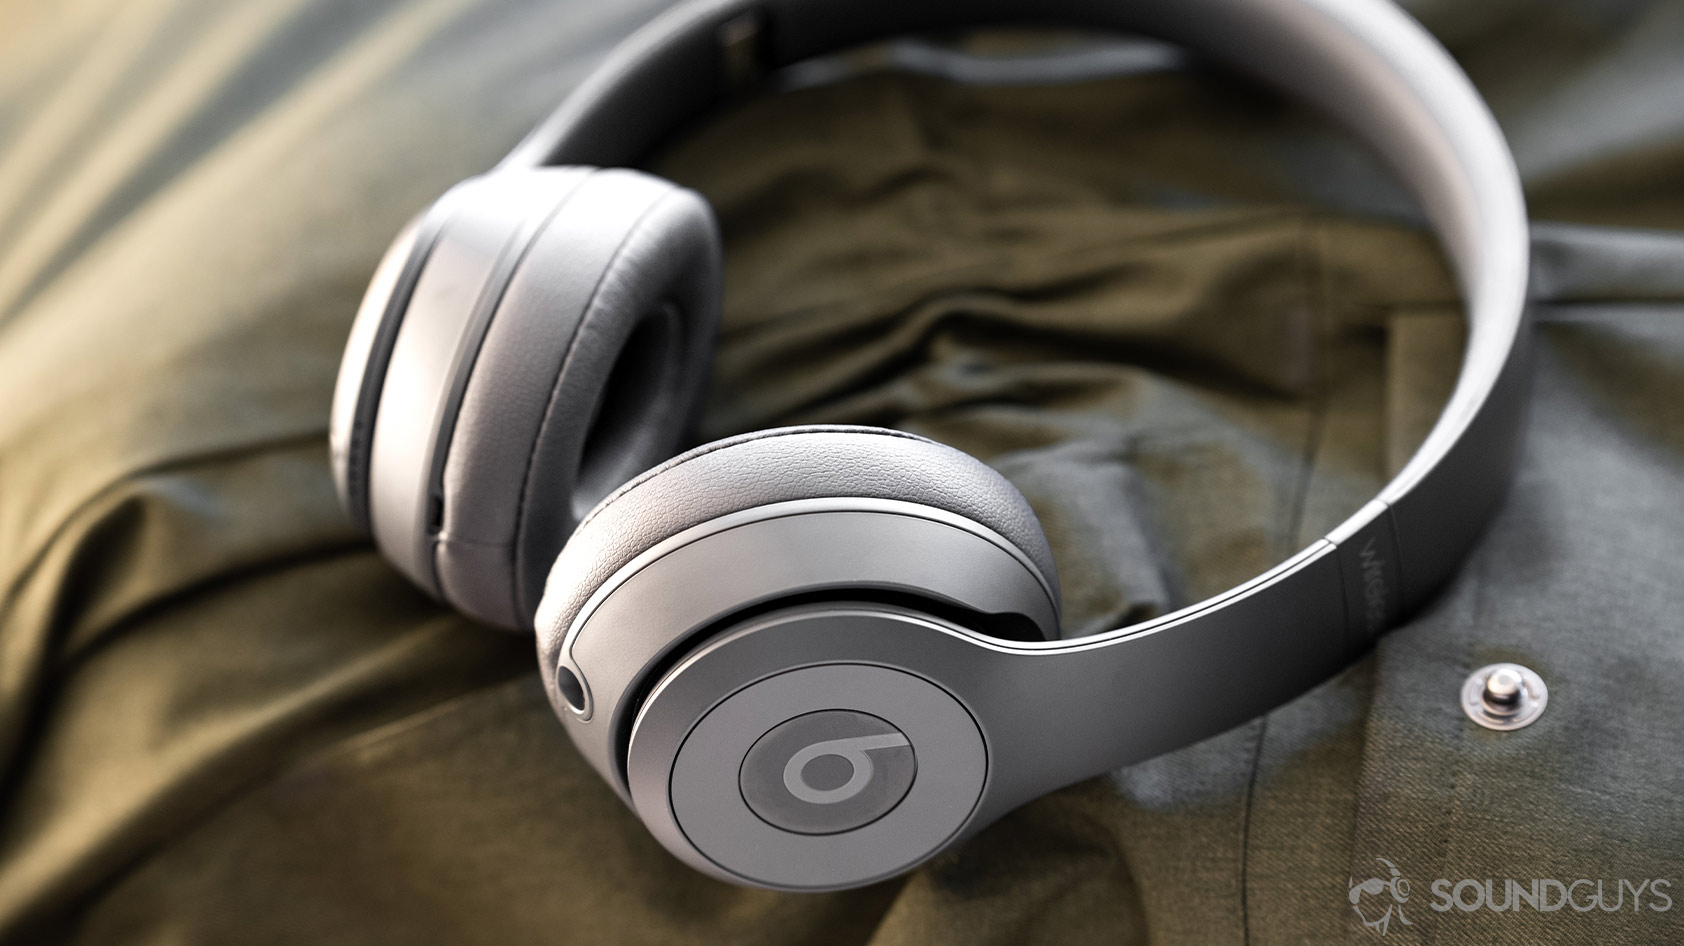 Beats Solo3 Wireless review: Good but outdated - SoundGuys